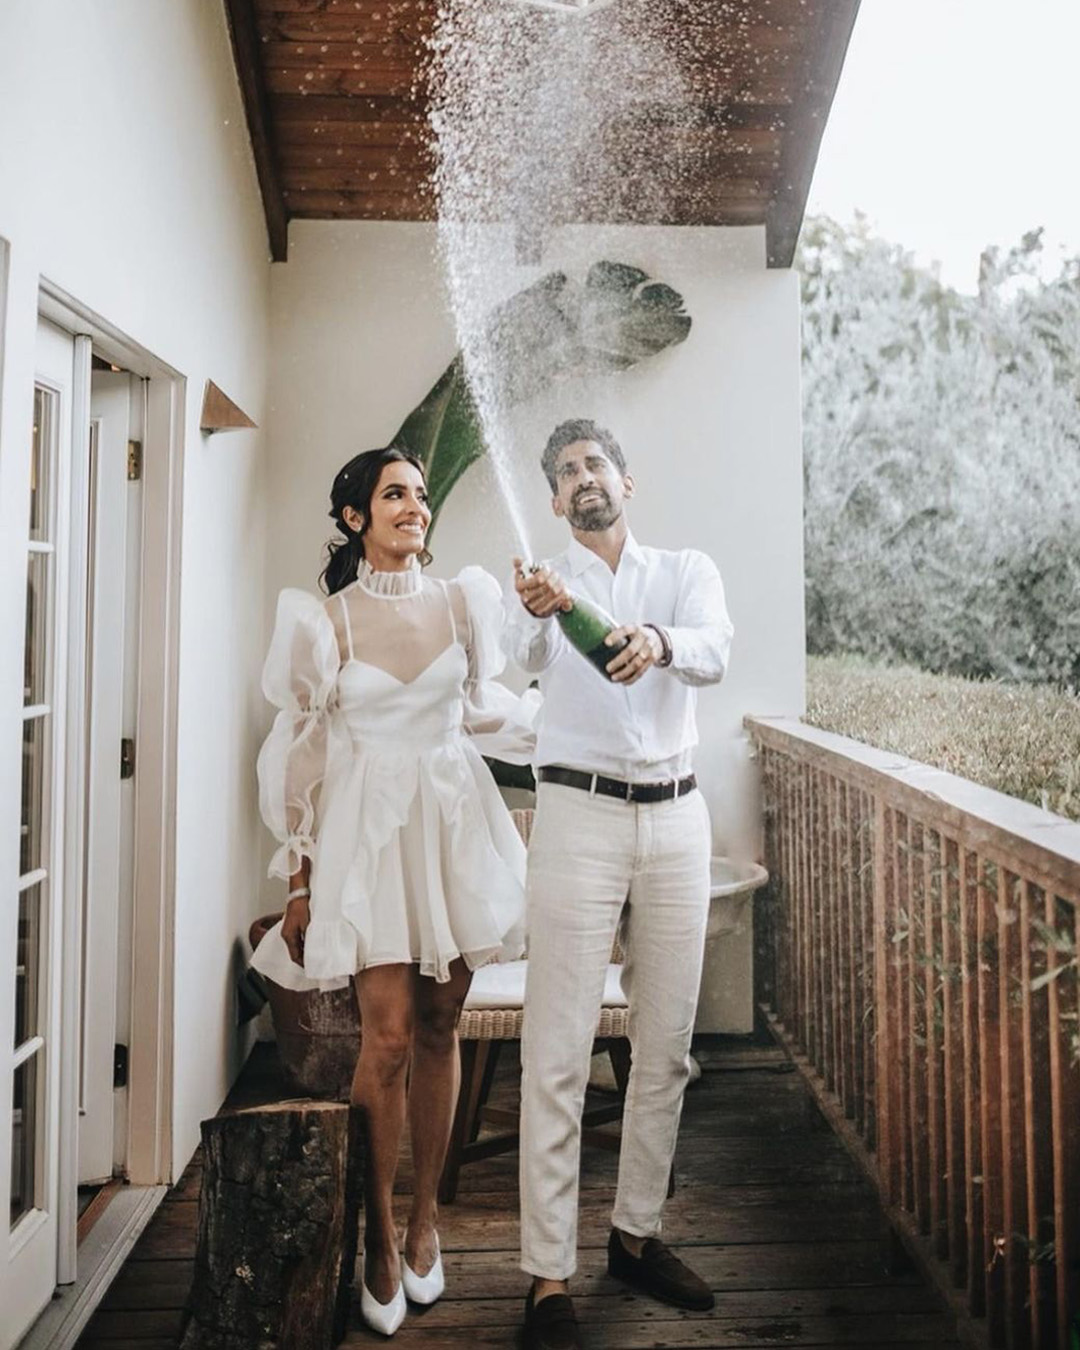 couple with champagne